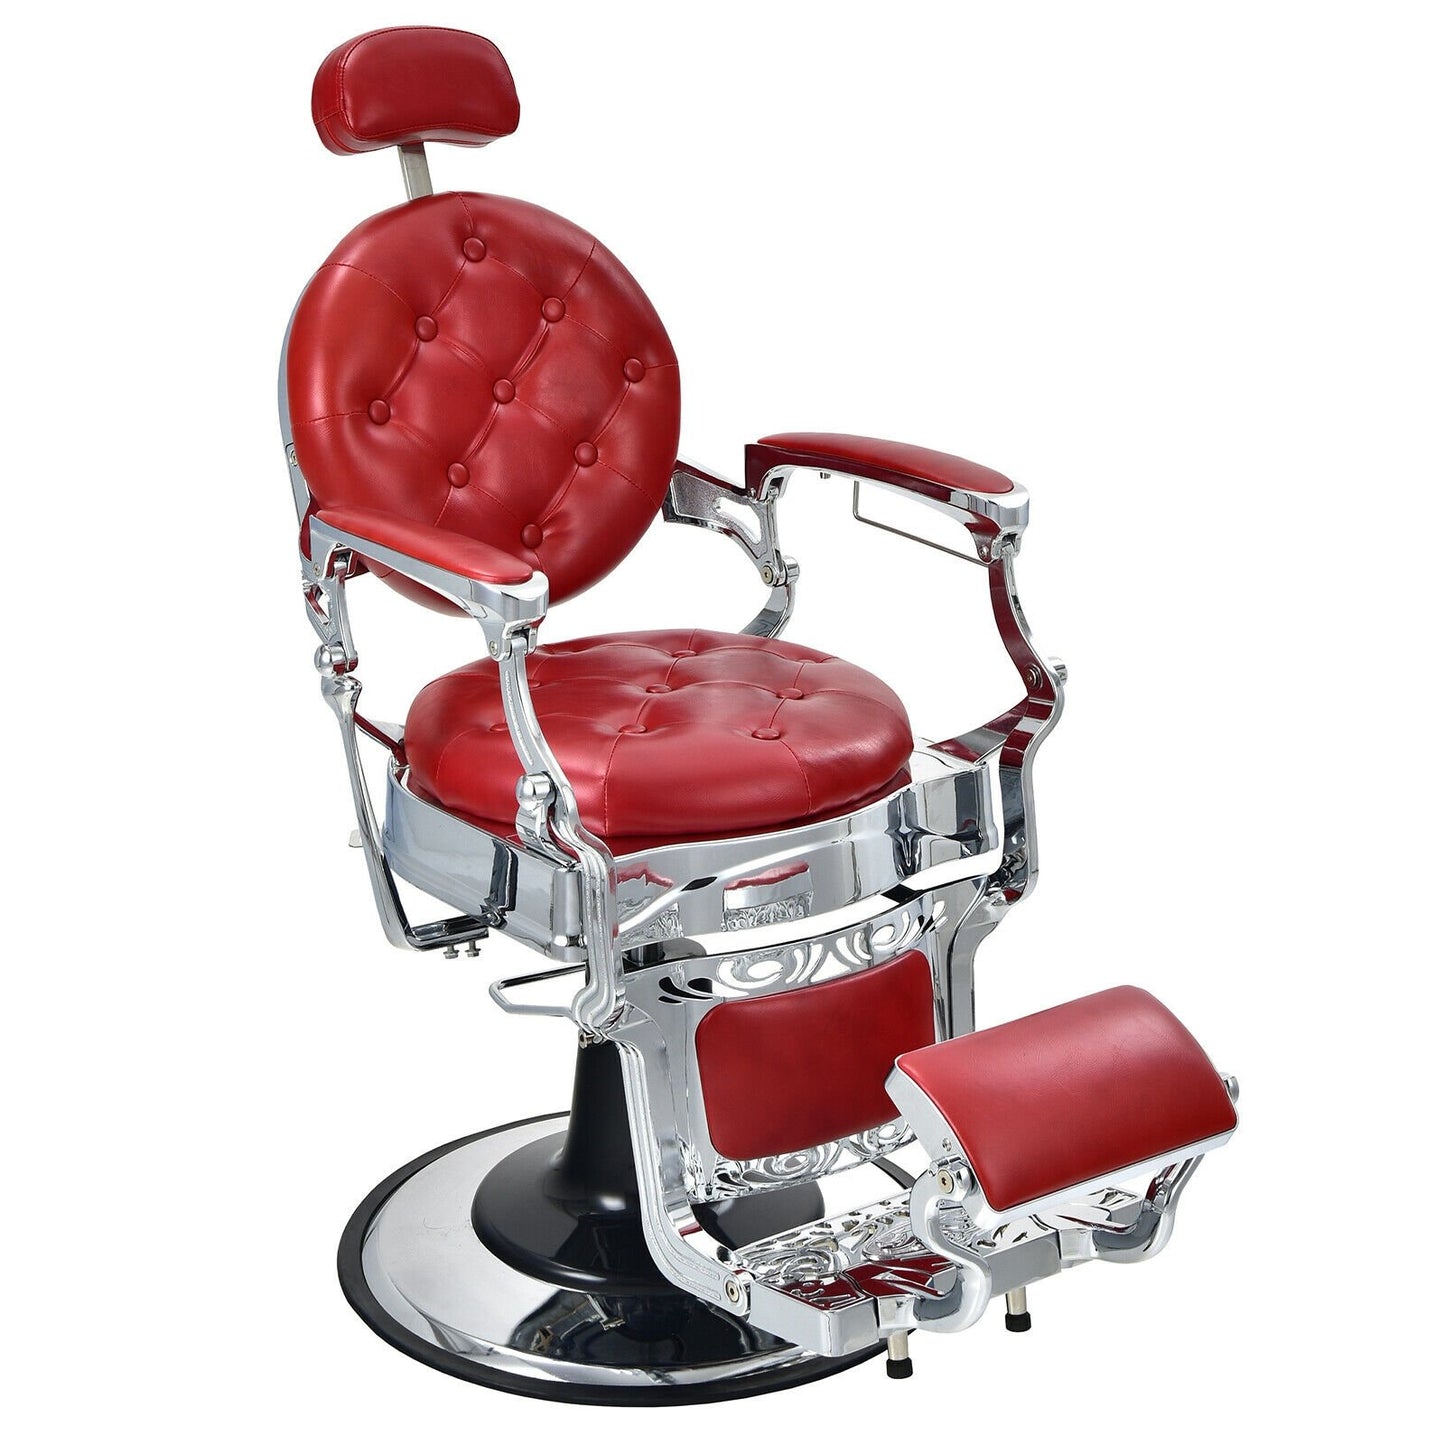 Vintage Barber Chair with Adjustable Height and Headrest, Red